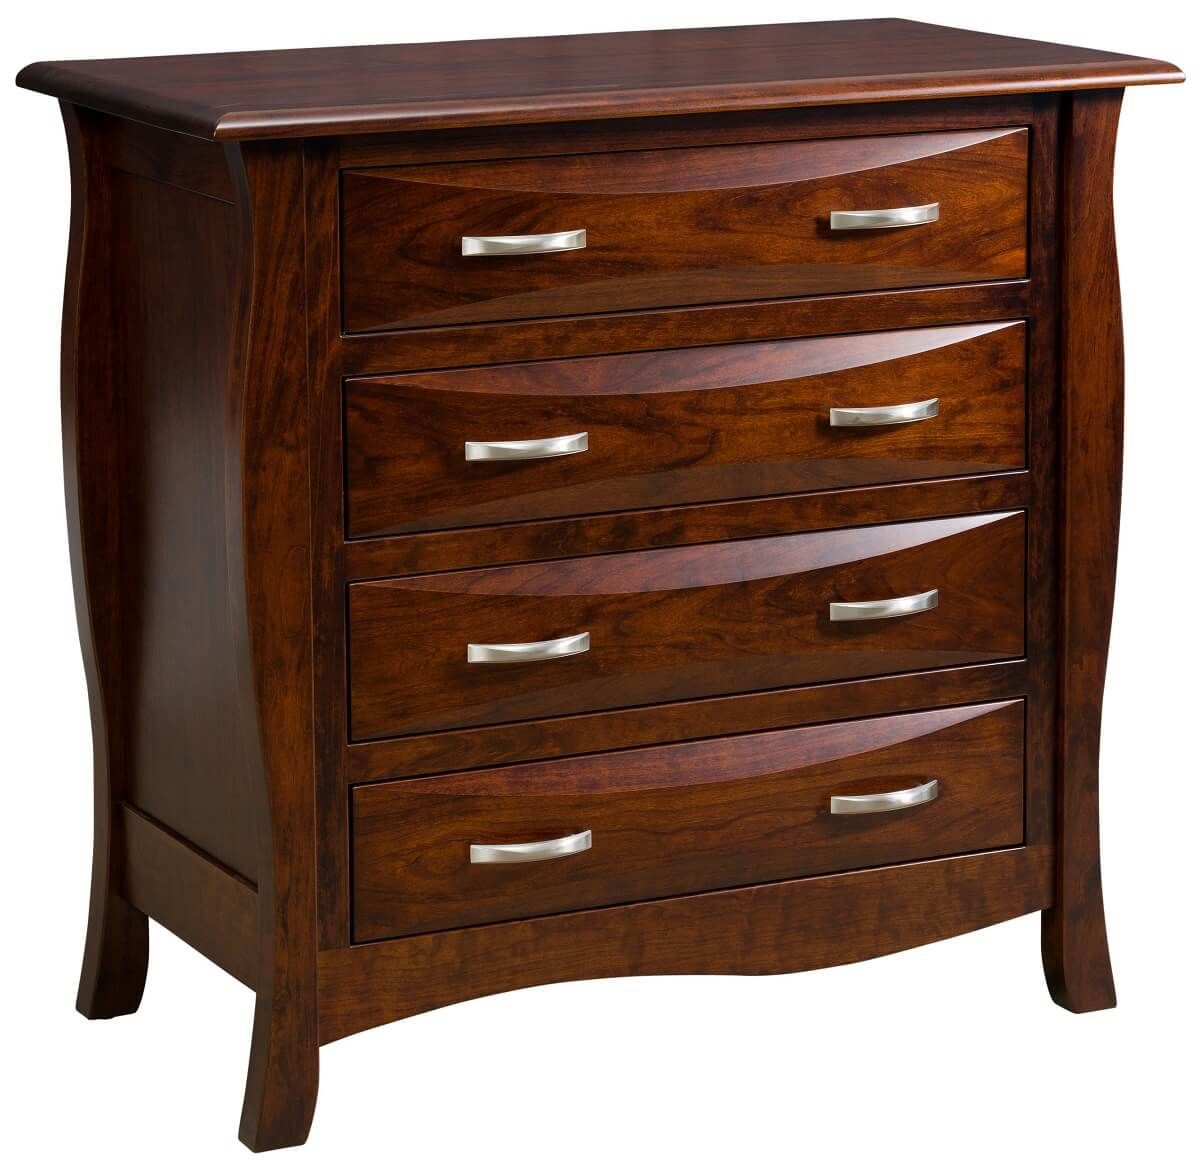 Modelli Chest of Drawers